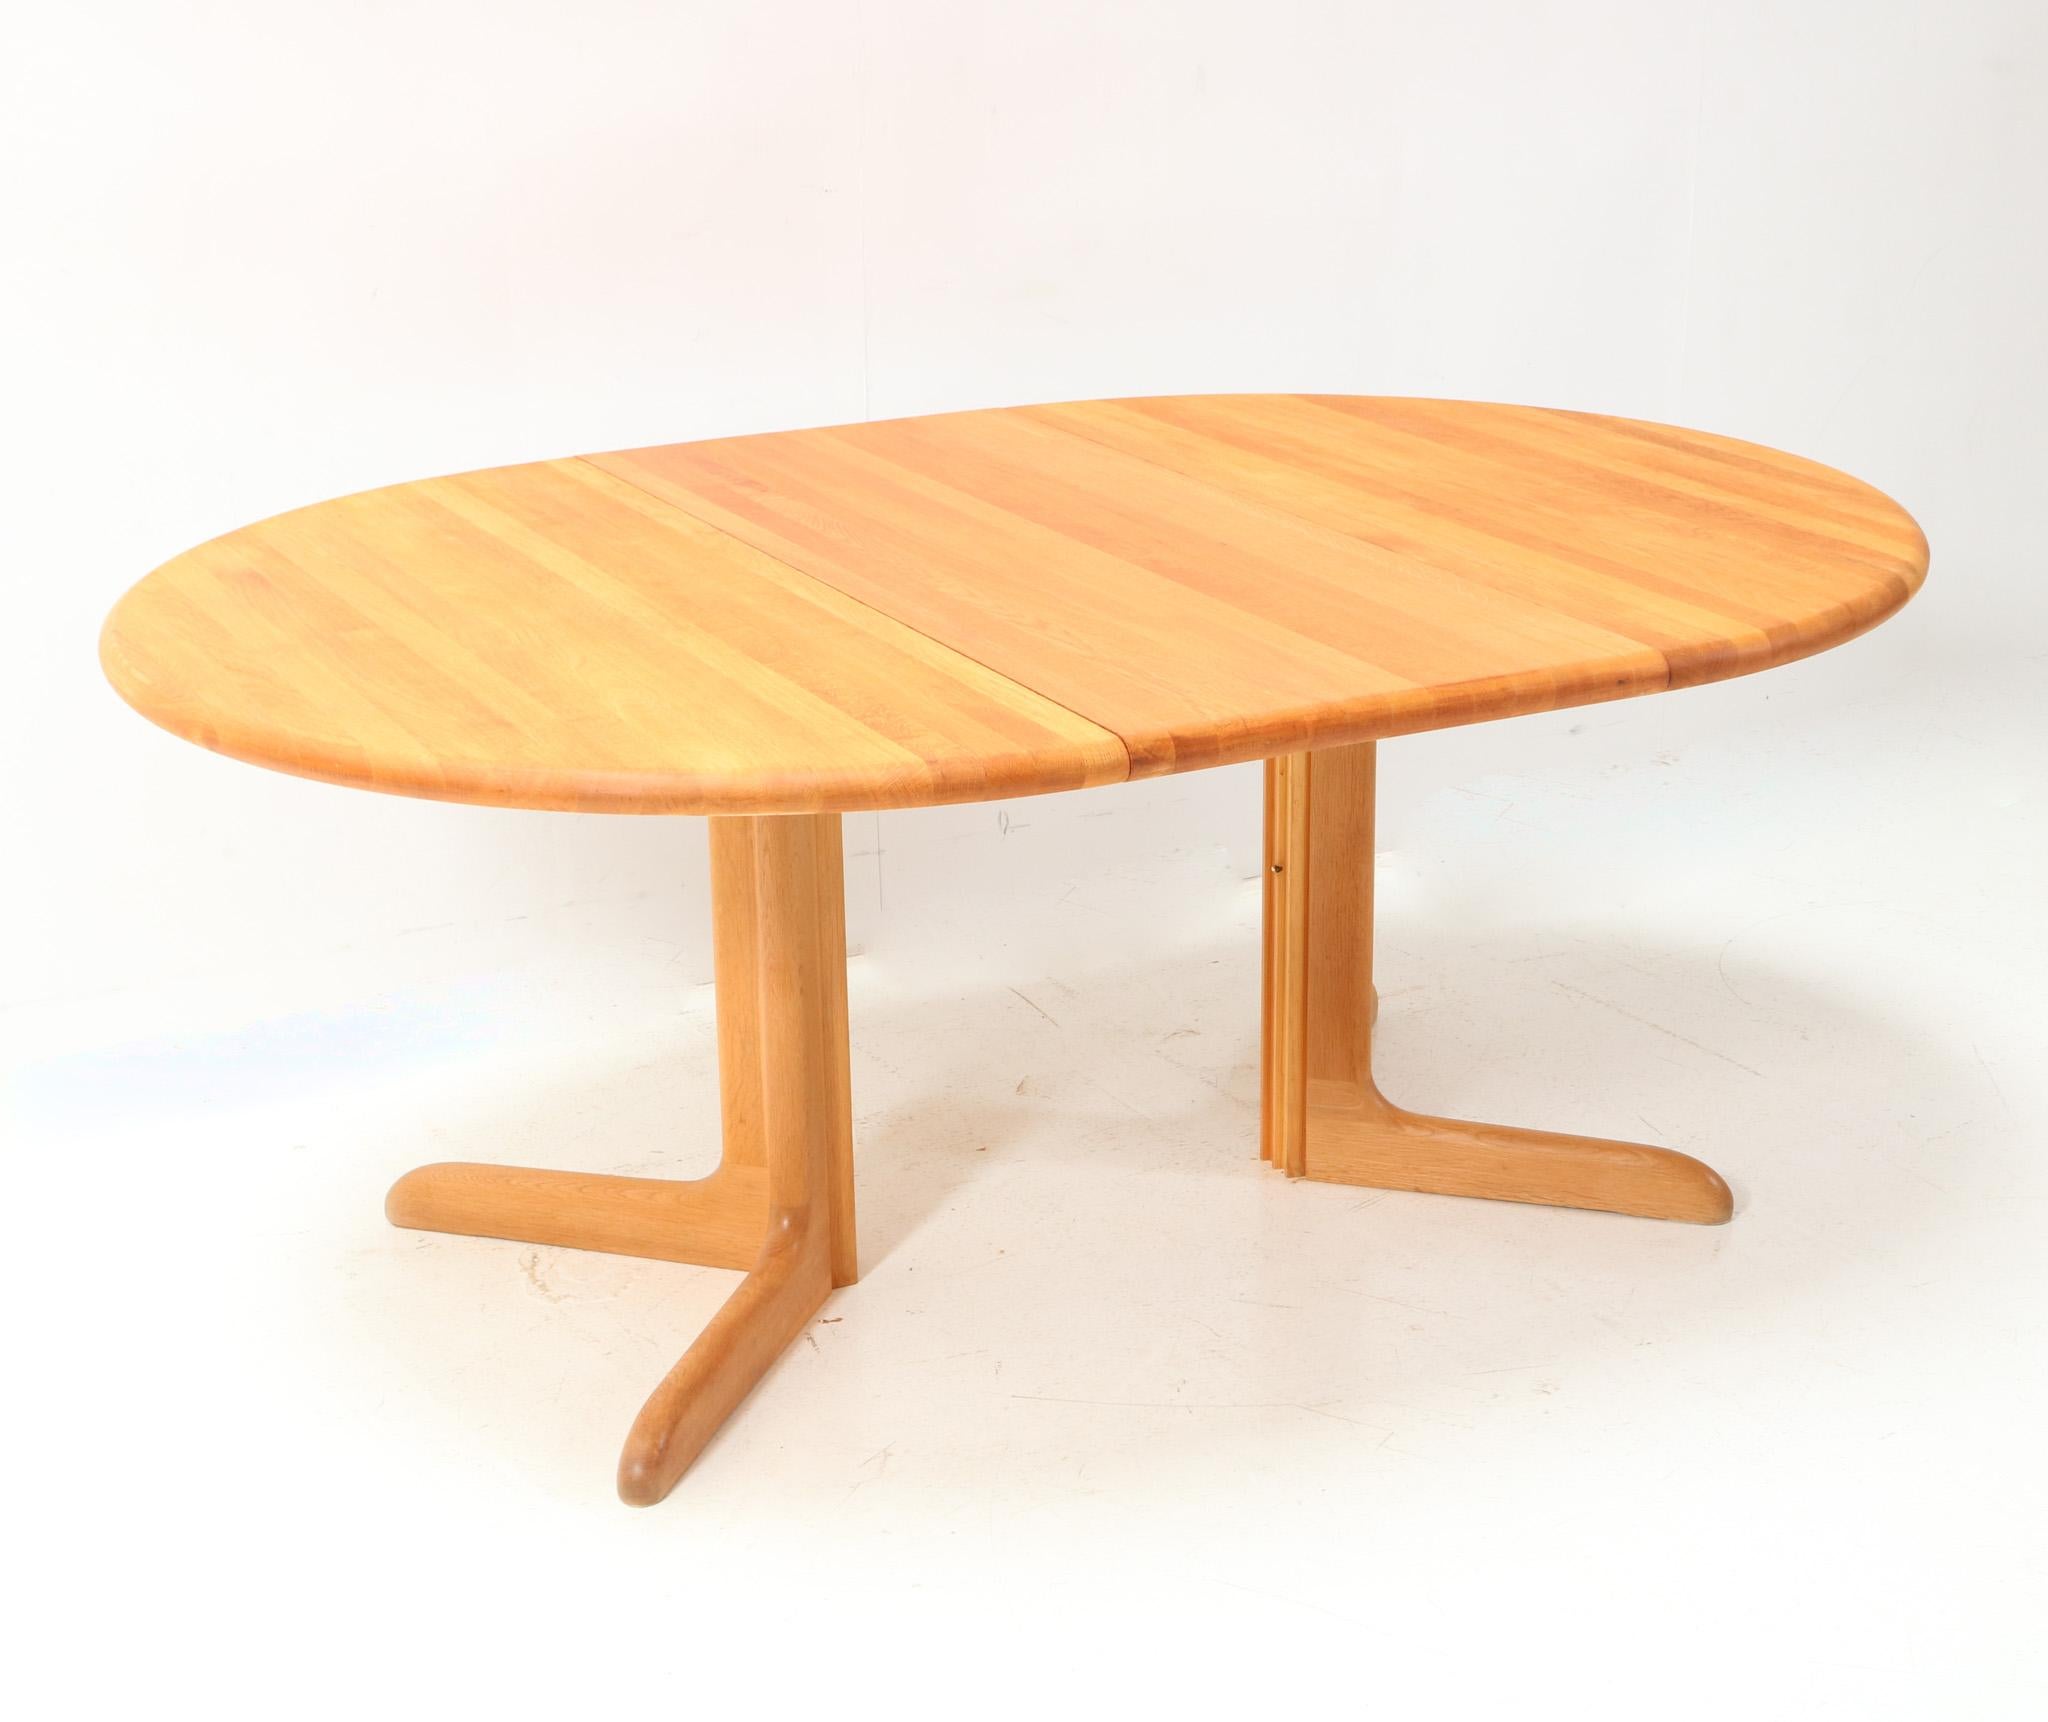 Magnificent and rare Mid-Century Modern extendable dining room table.
Design by Niels Otto Møller for J.L. Møllers Møbelfabrik.
Solid oak base with original solid oak top.
Measurements of the original solid oak extension: 51.5 cm or 20.28